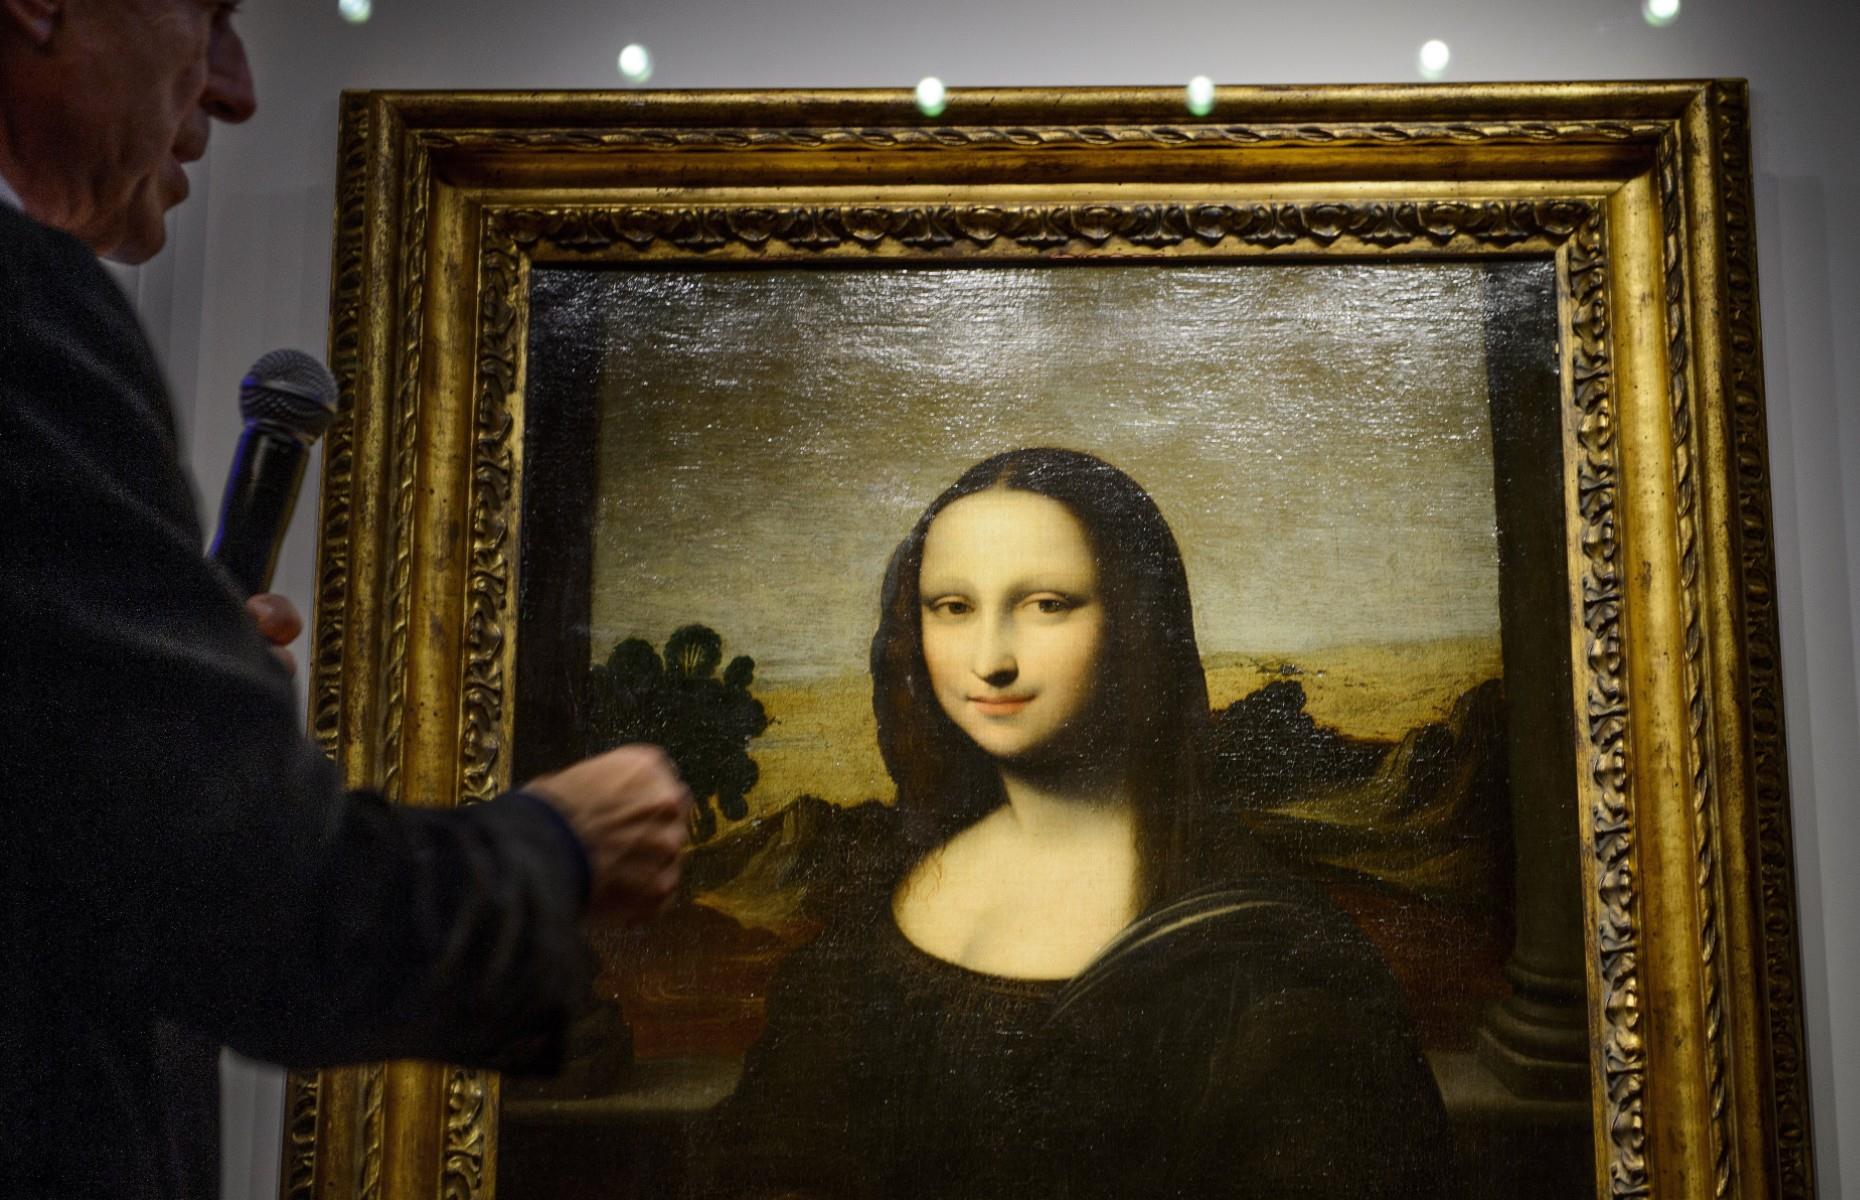 <p>The story of the ‘Earlier <em>Mona Lisa</em>' or the ‘Isleworth <em>Mona Lisa</em>' (pictured) begins sometime before World War I. English connoisseur Hugh Blaker spotted the painting in a manor house in Somerset. It had hung there for over a century, having been bought in Italy as an original da Vinci work. The painting bore a striking resemblance to the famed <em>Mona Lisa</em> hanging in the Louvre. The key difference was this painting depicted a much younger version of the enigmatic subject.</p>